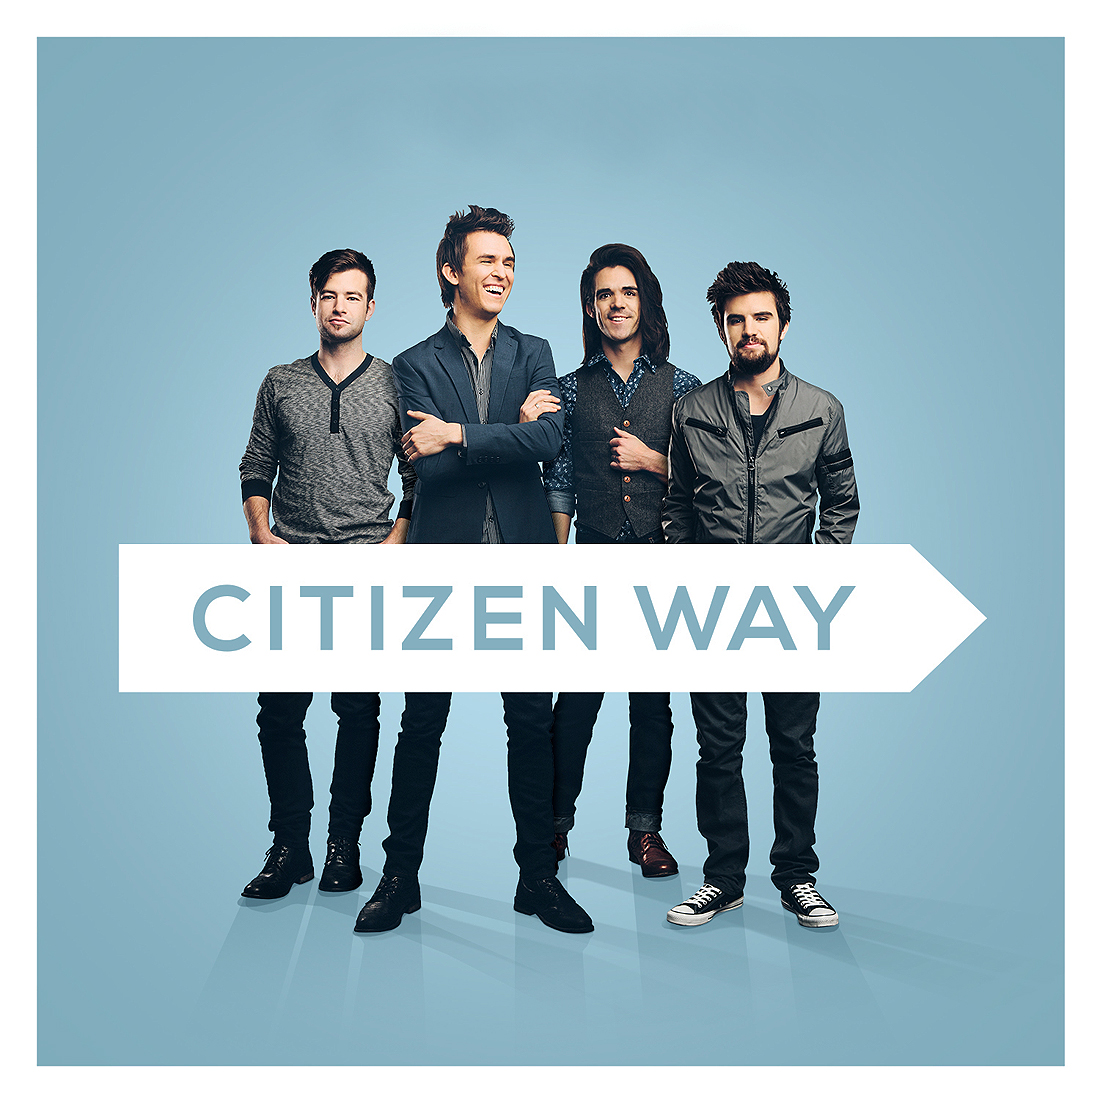 An Interview With Citizen Way